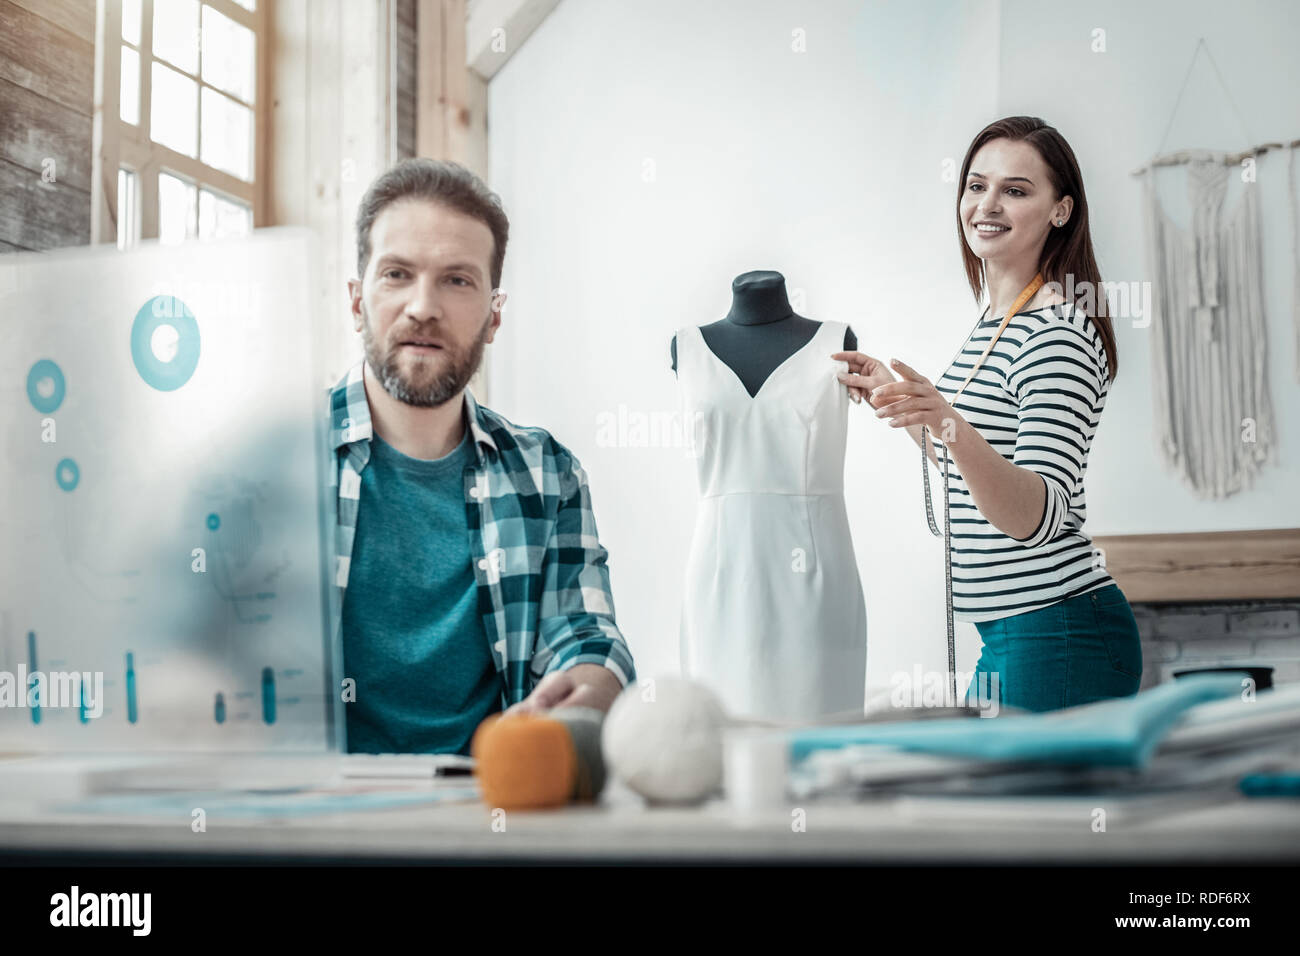 Talented designers having much inspiration while working together Stock Photo